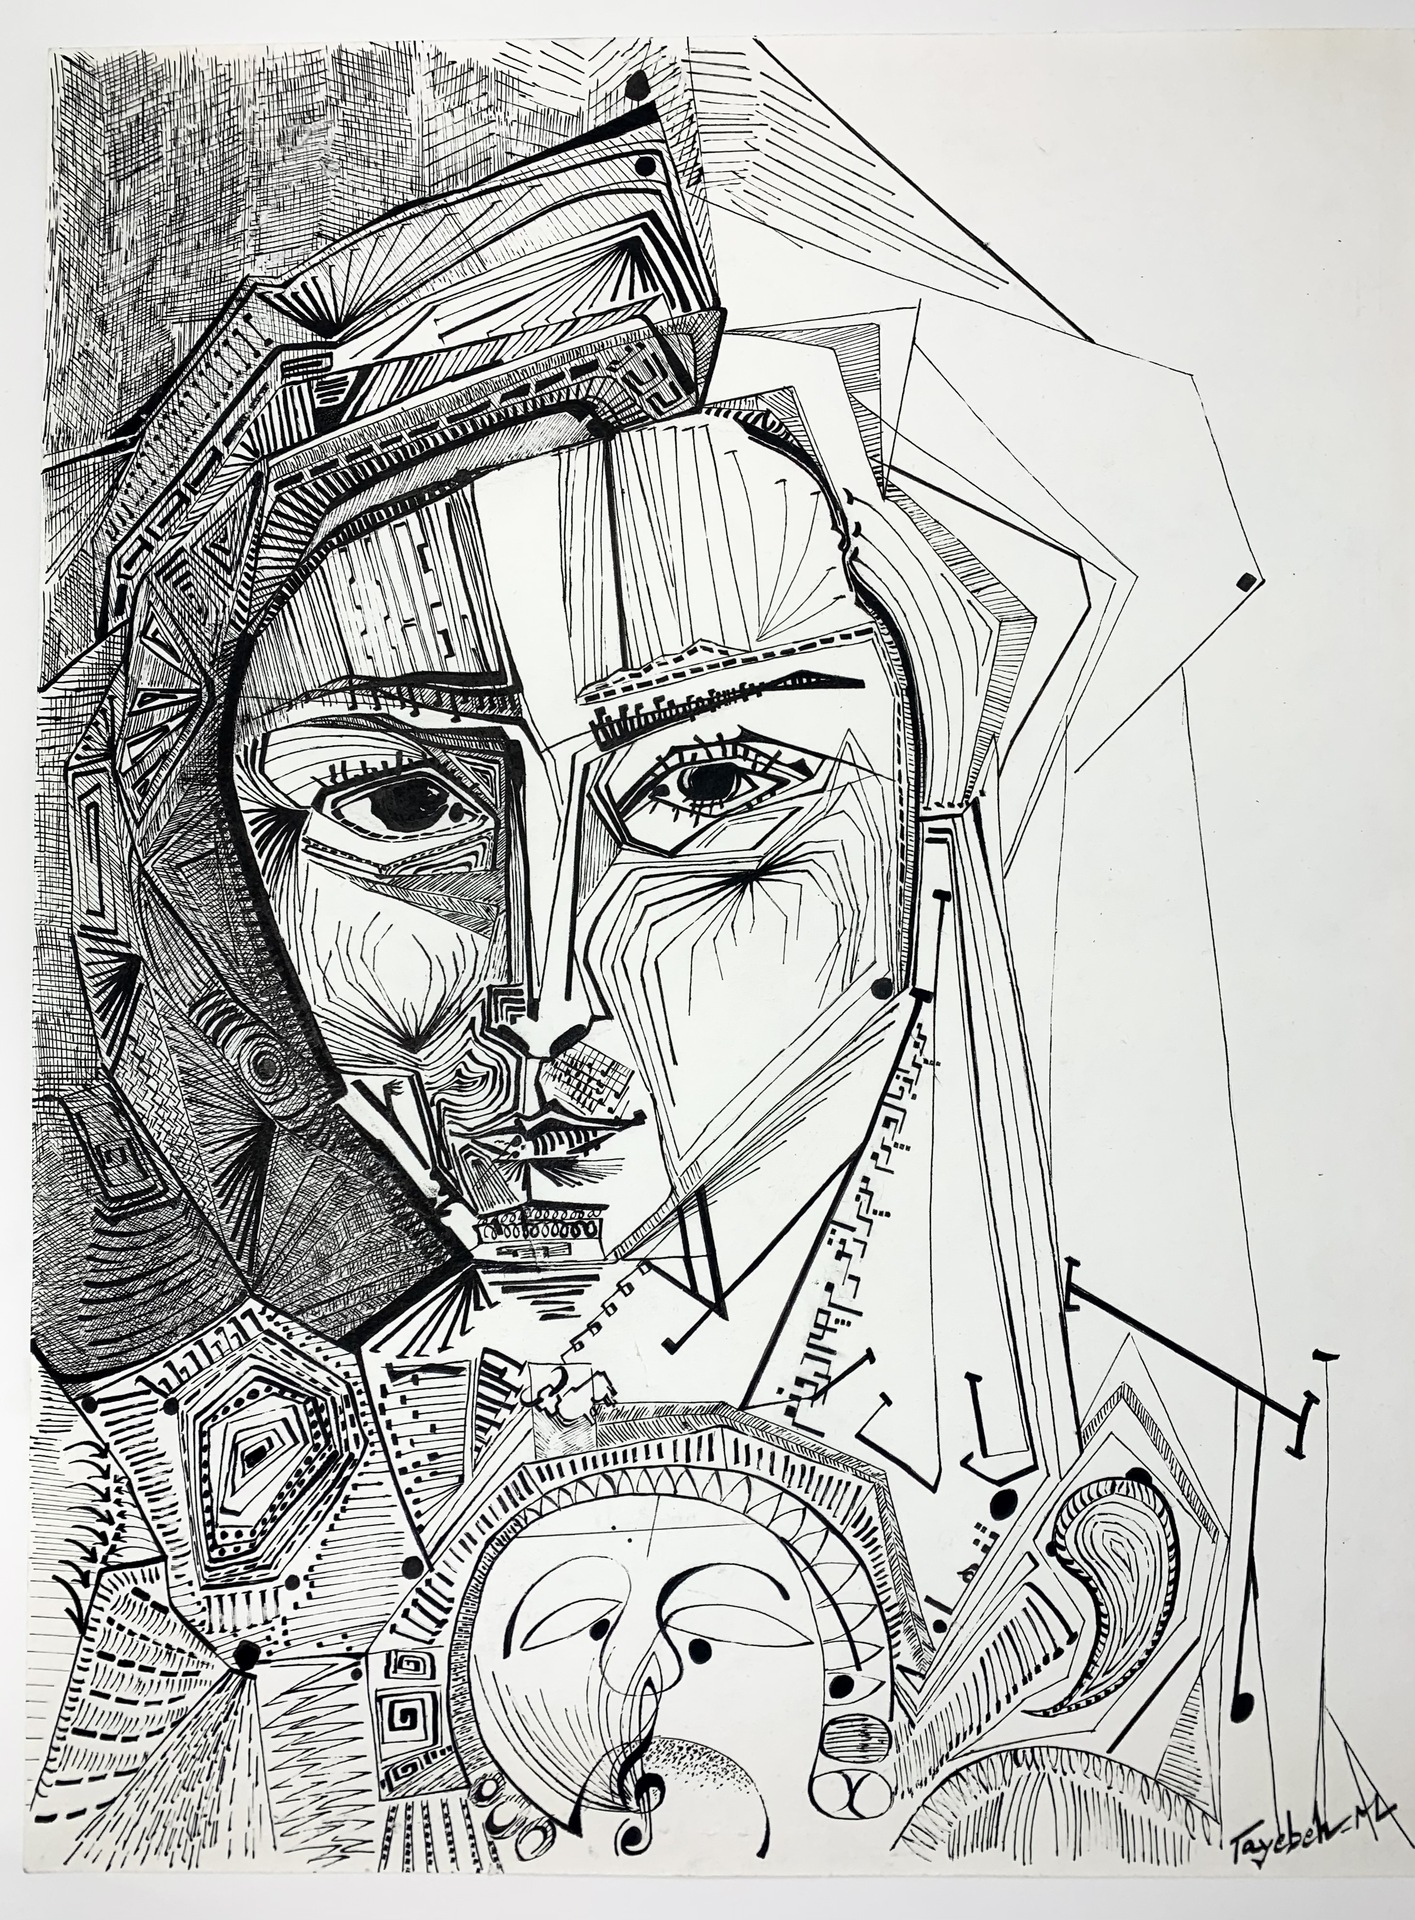 Shahin T. Massoudi black and white Ink self portrait drawn with symbols and depicts women's struggles against misogyny and sexism.